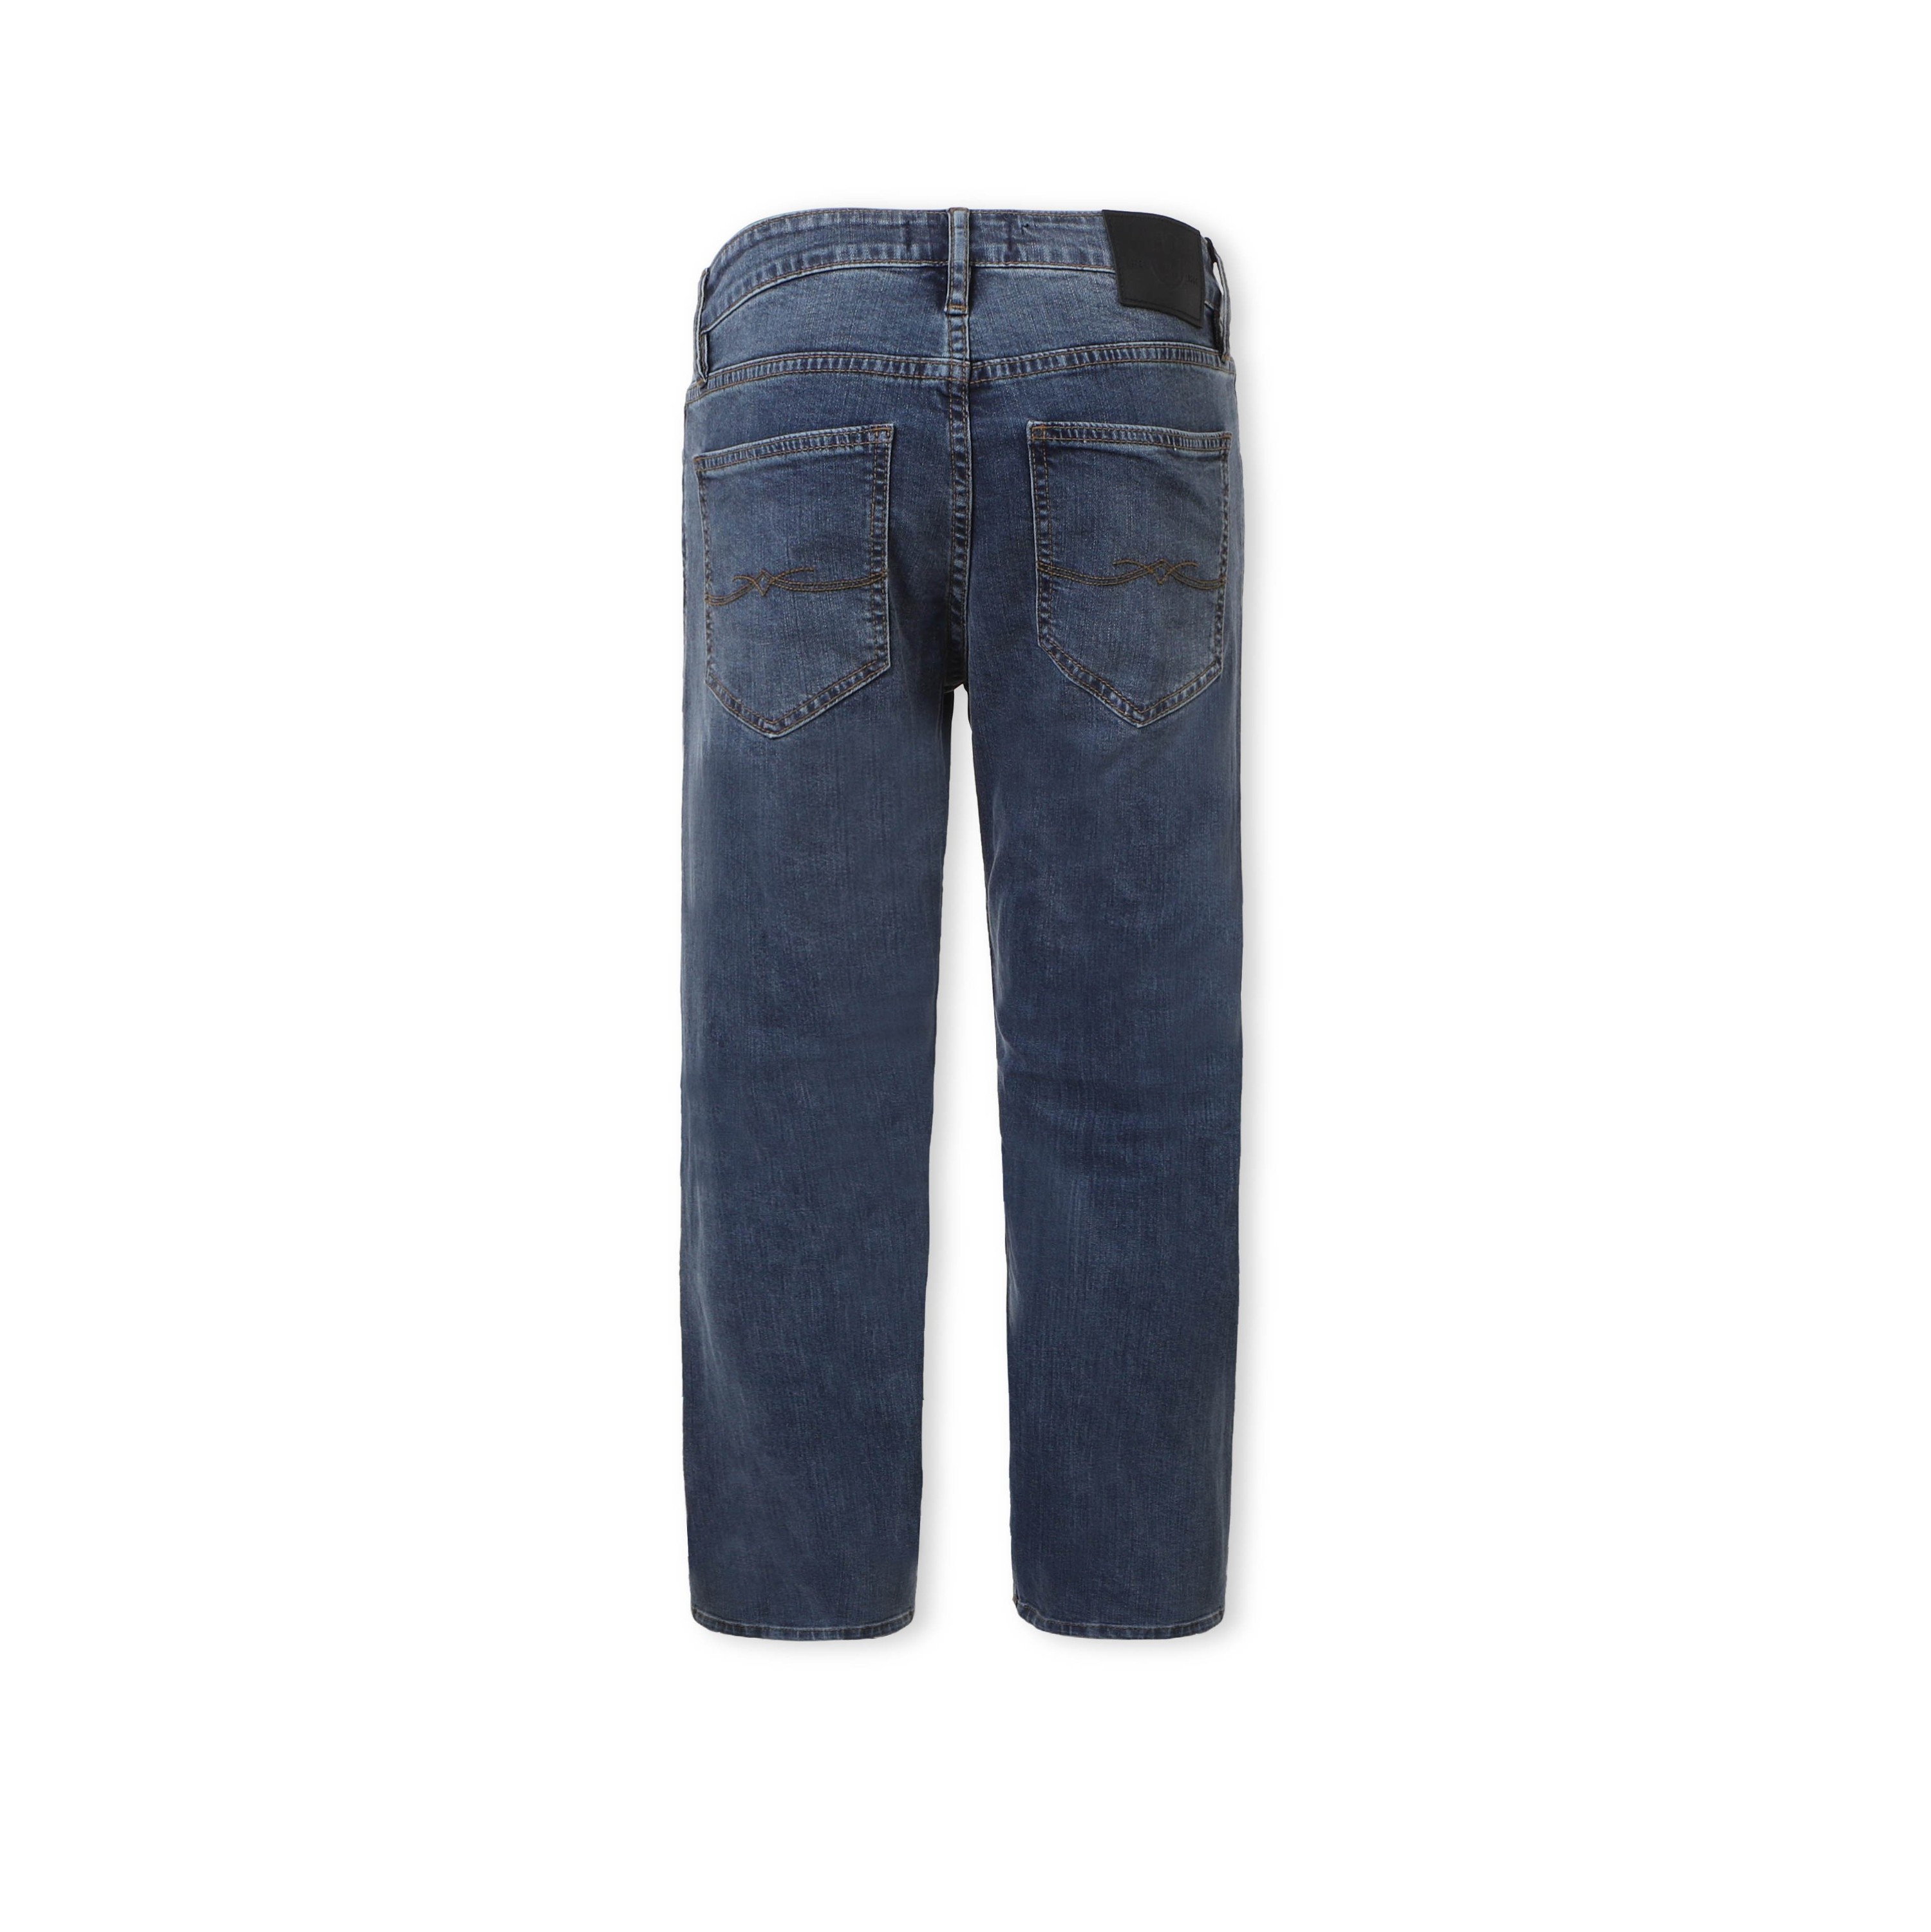 Quần jean nam ống suông Old Sailor - OSL STRAIGHT JEANS - 6554 - Big size upto 42